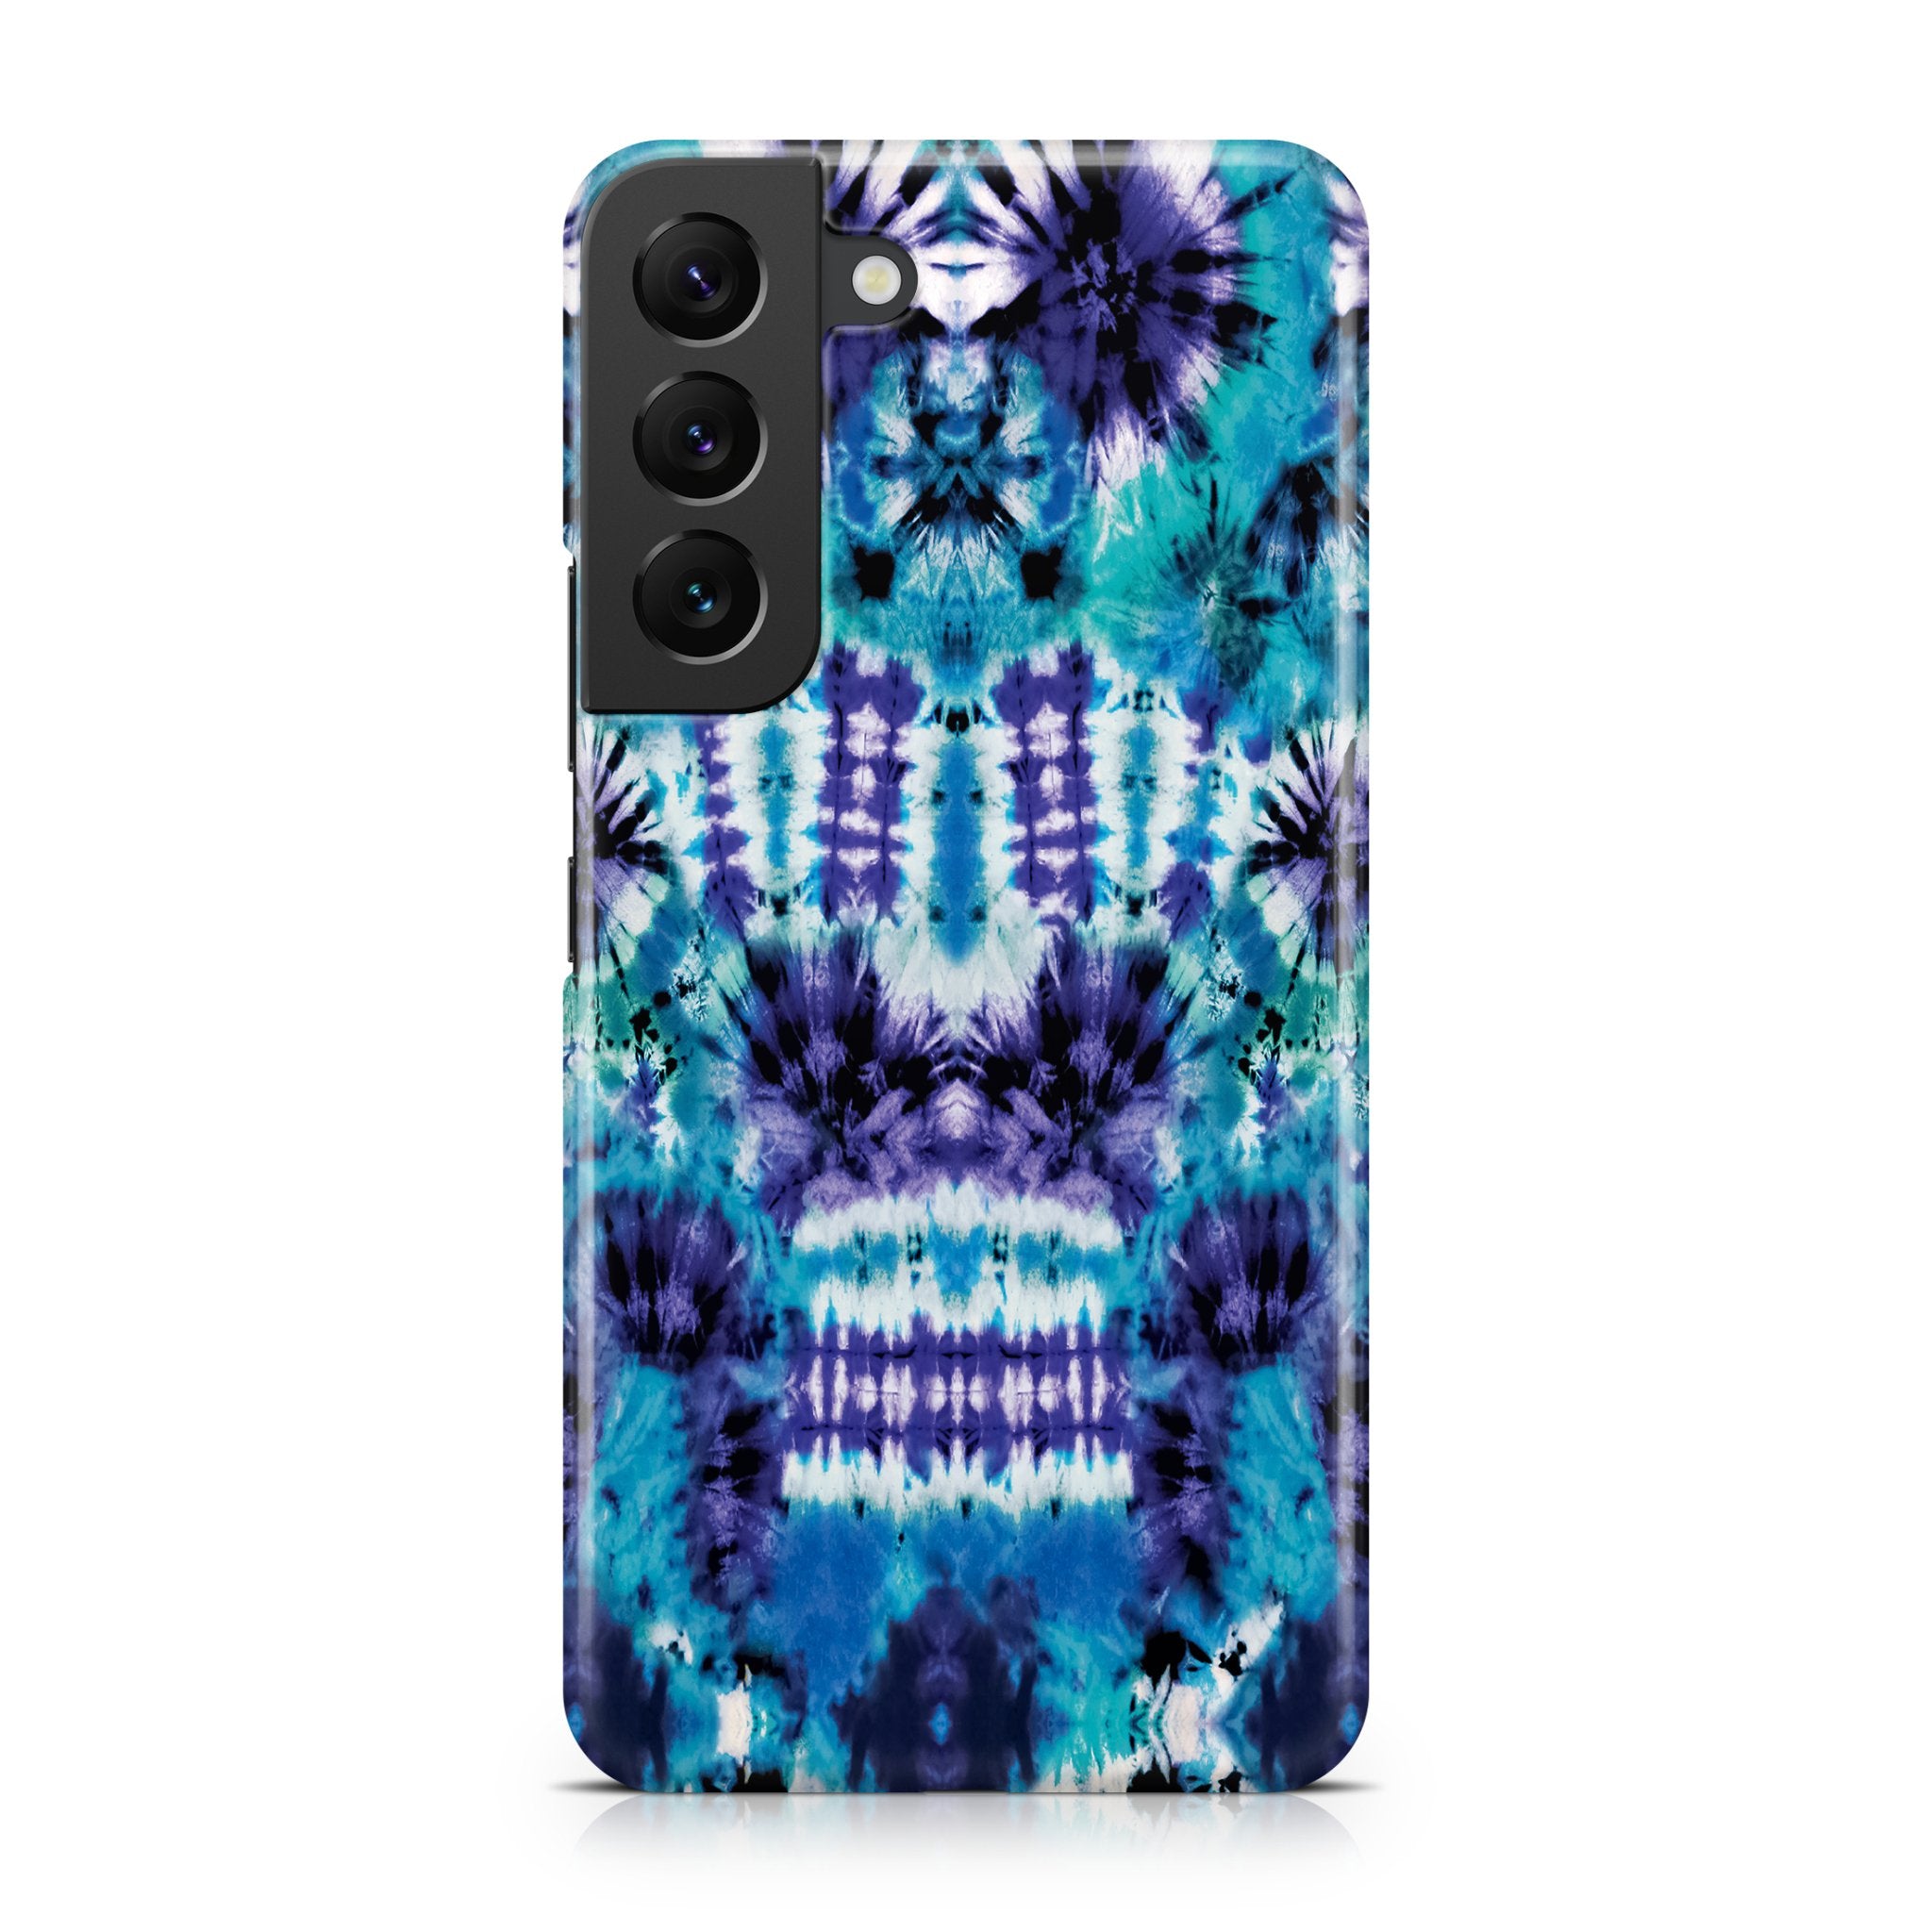 Blue Tie Dye - Samsung phone case designs by CaseSwagger